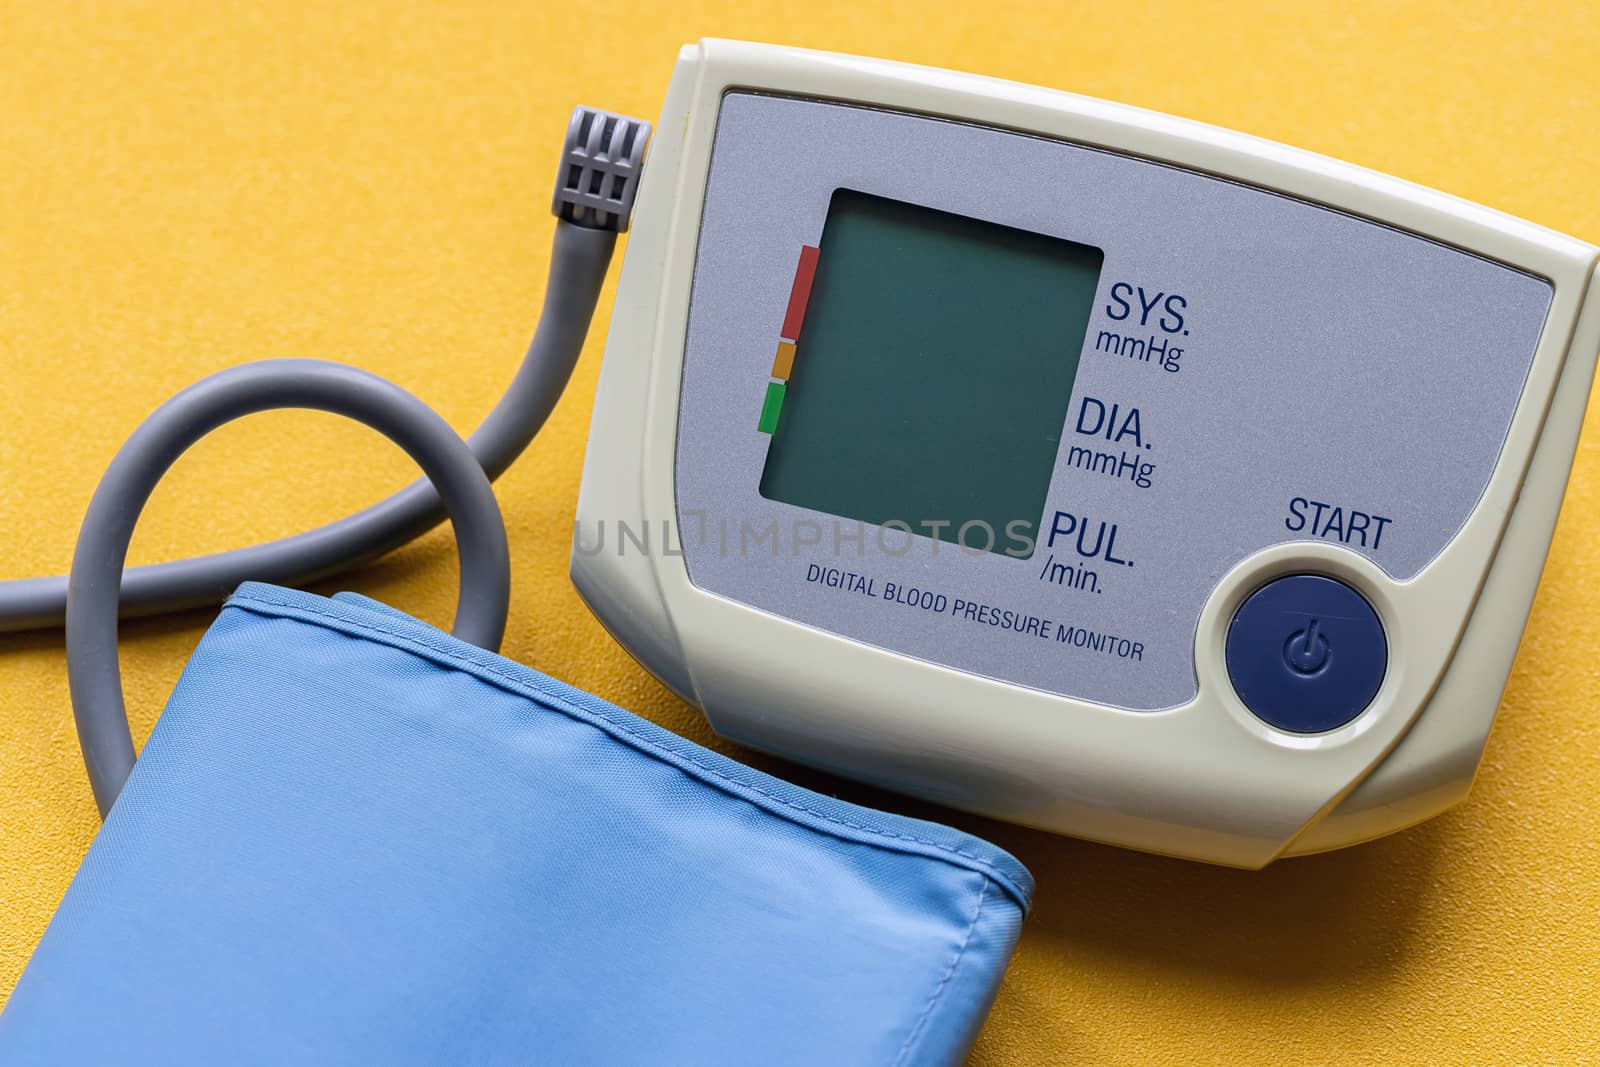 modern medical electronic tonometer on a bright yellow background.